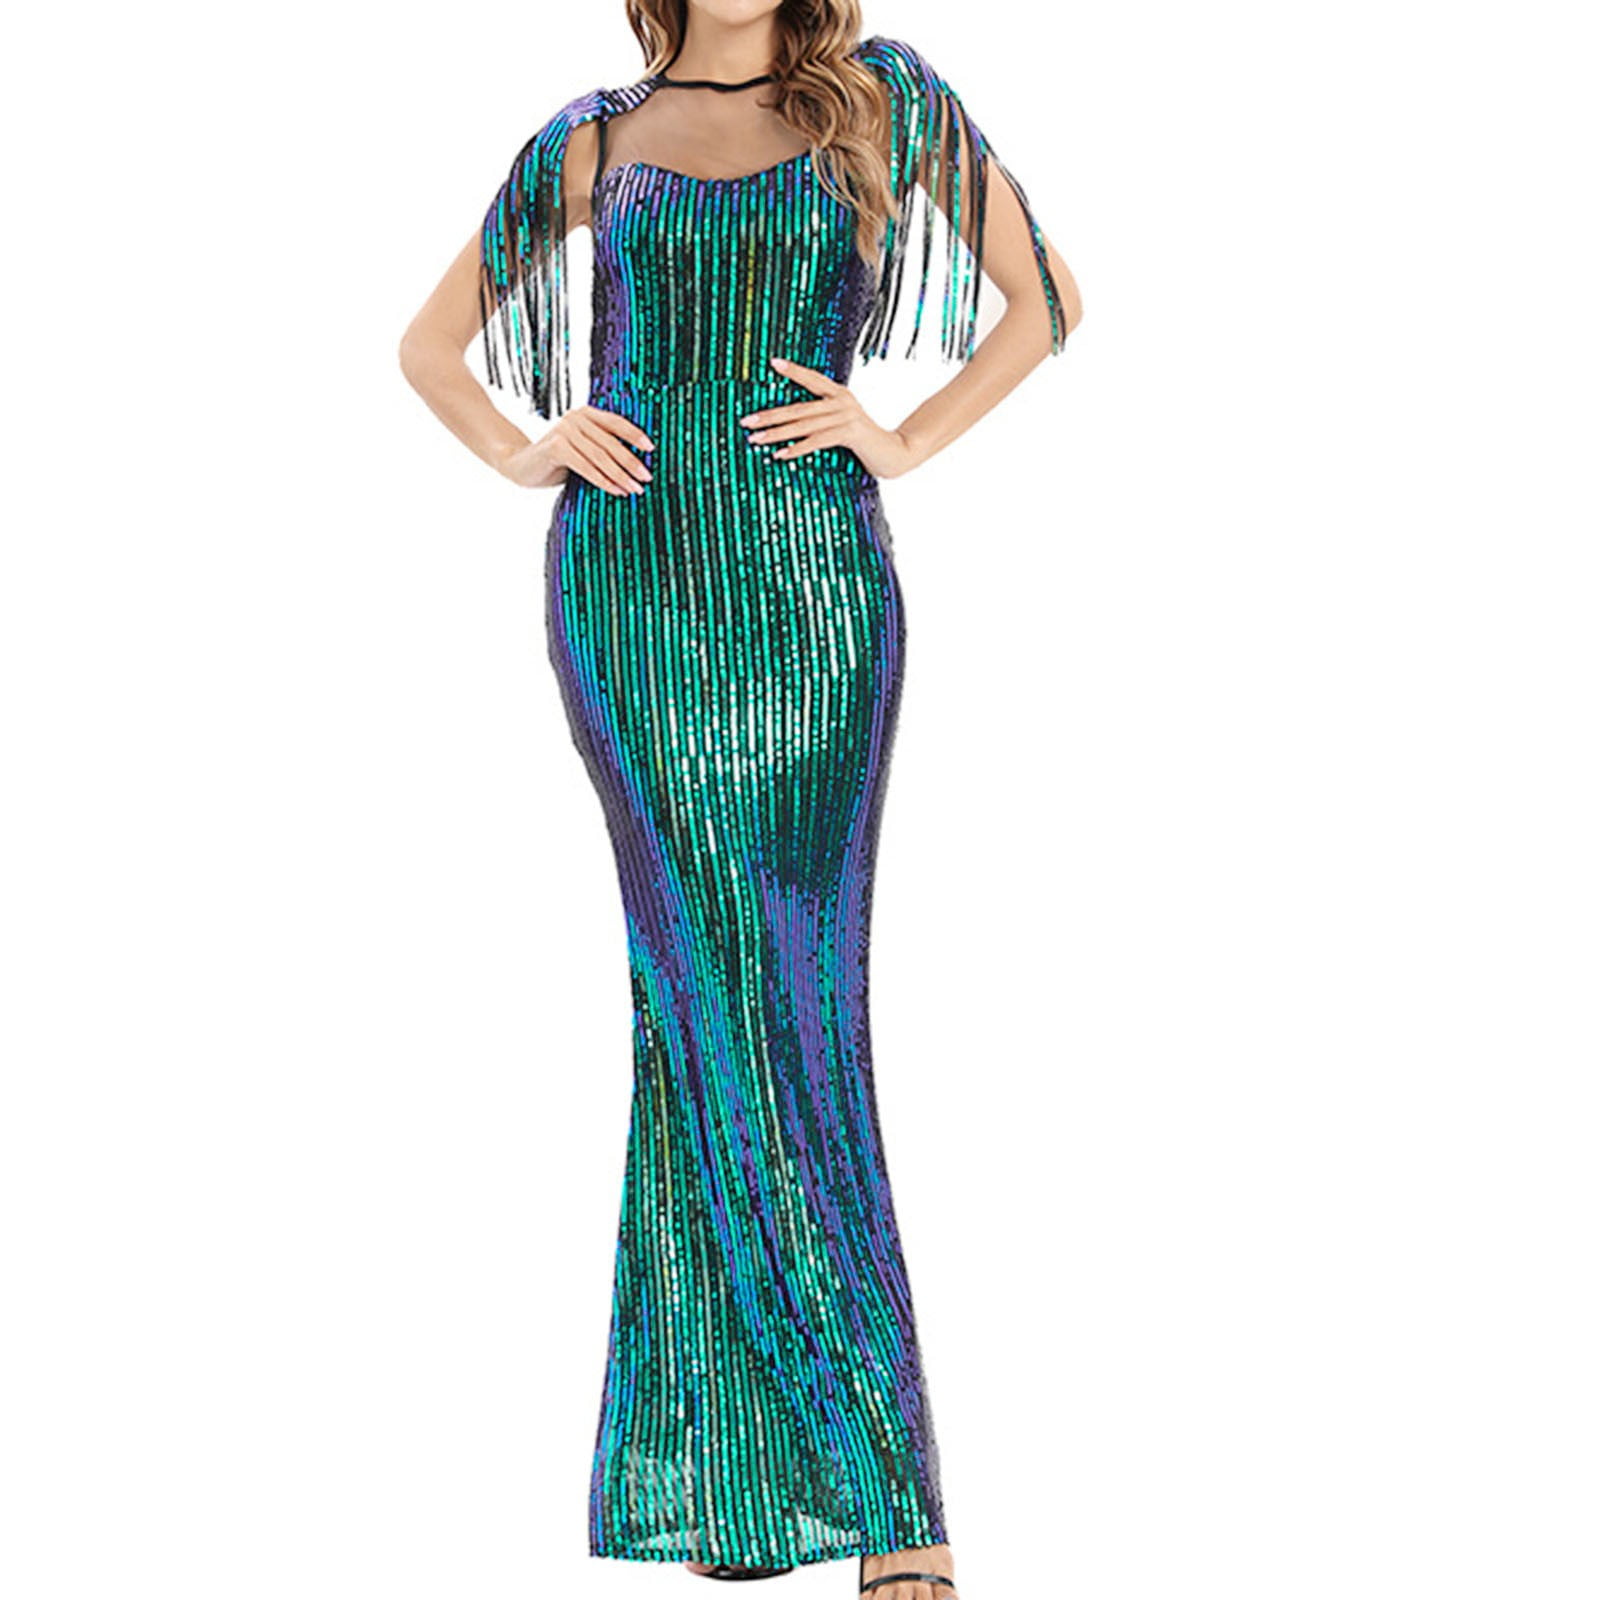 Buy straight gown party wear in India @ Limeroad